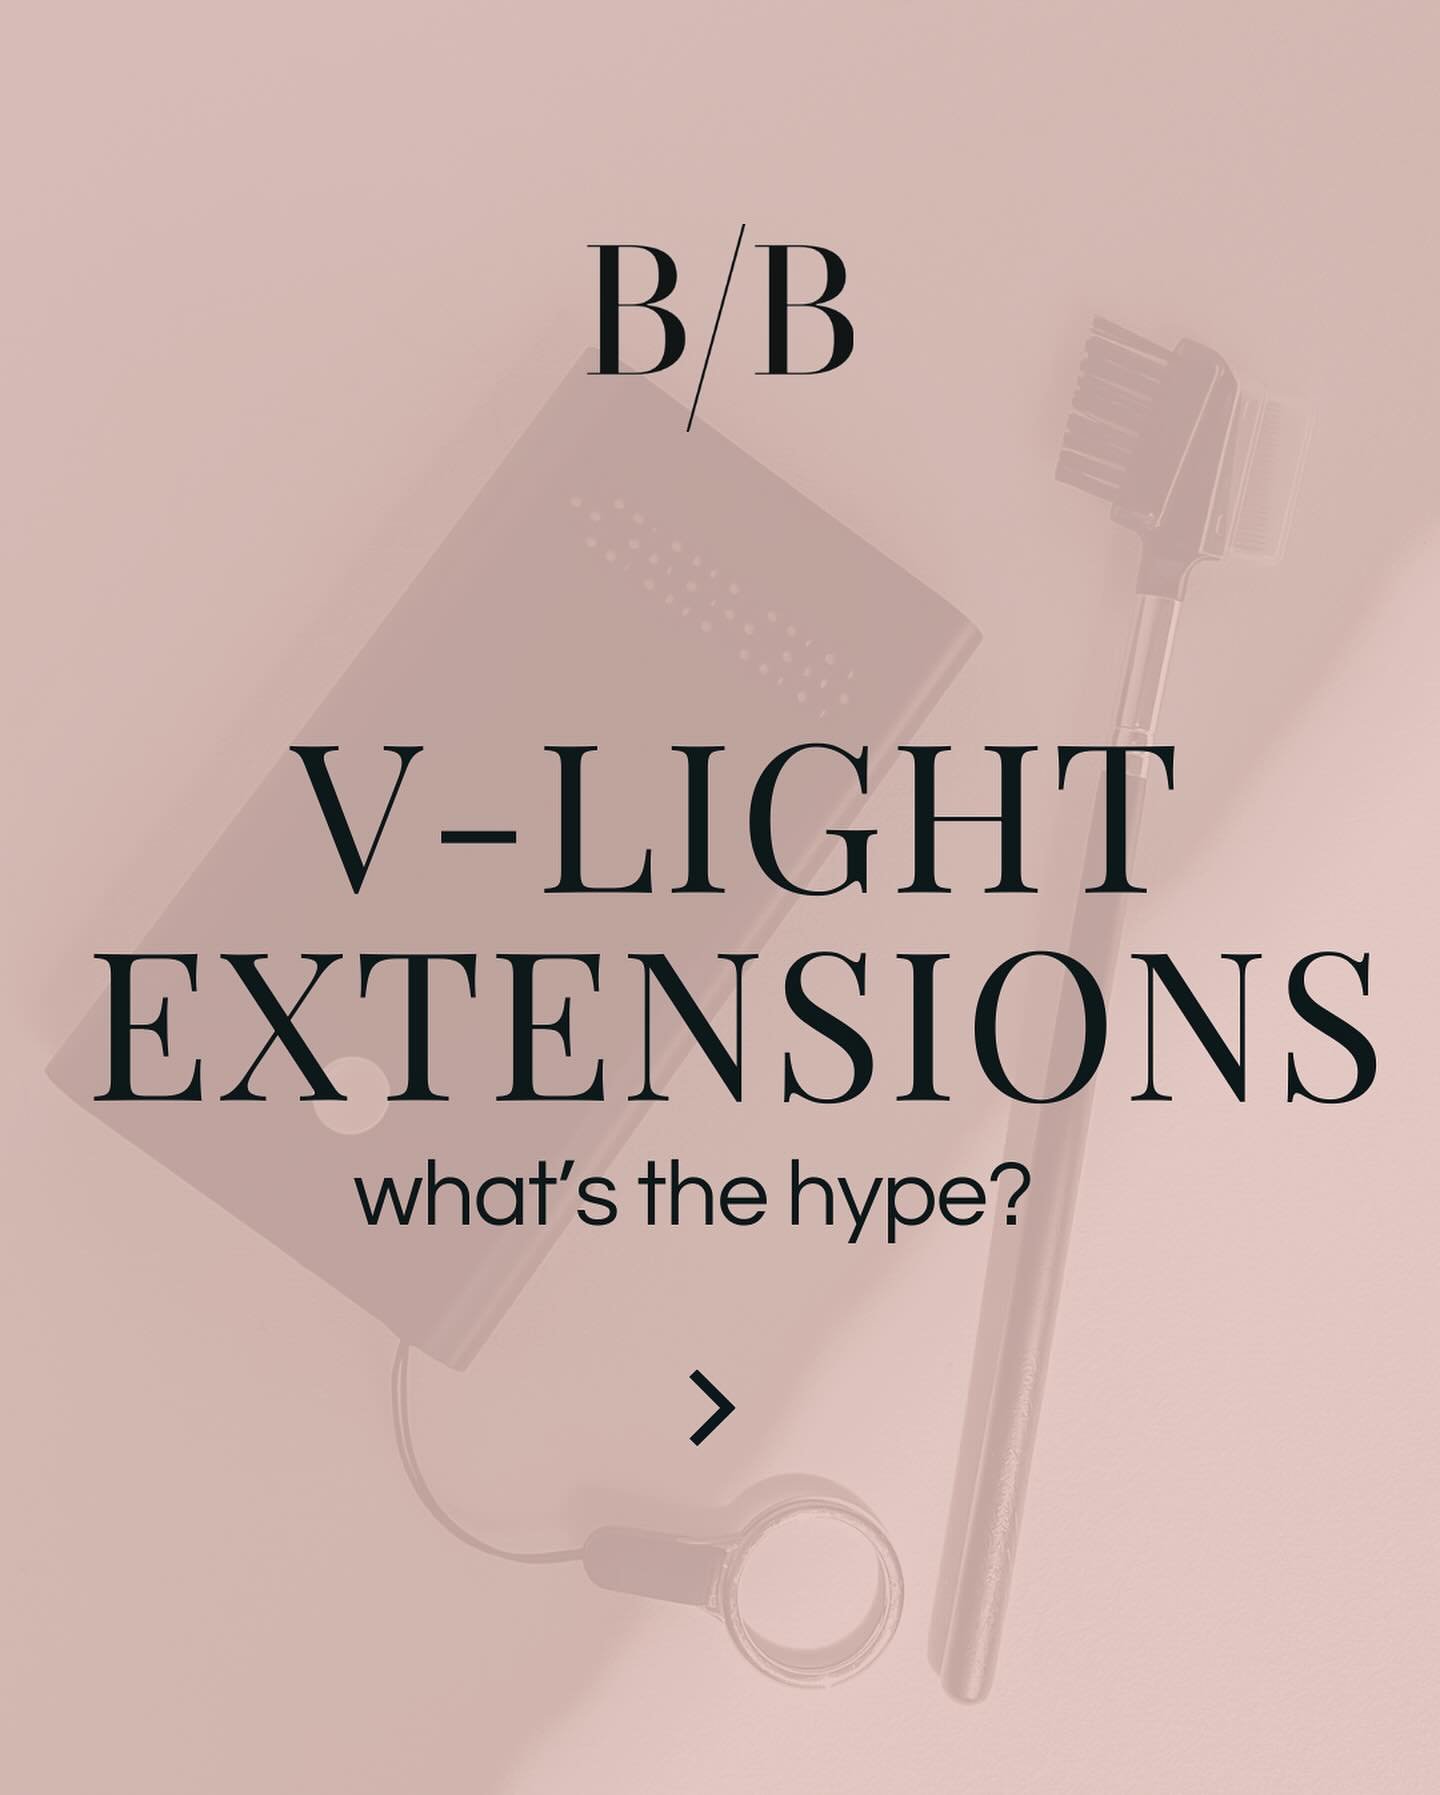 We&rsquo;ll be honest&hellip; we first learned V-Light to look cool. It was the new, trendy thing and we wanted a piece. Now after working with this method for months, we&rsquo;ve realized it&rsquo;s here to stay. 

* Do you want more hair right arou